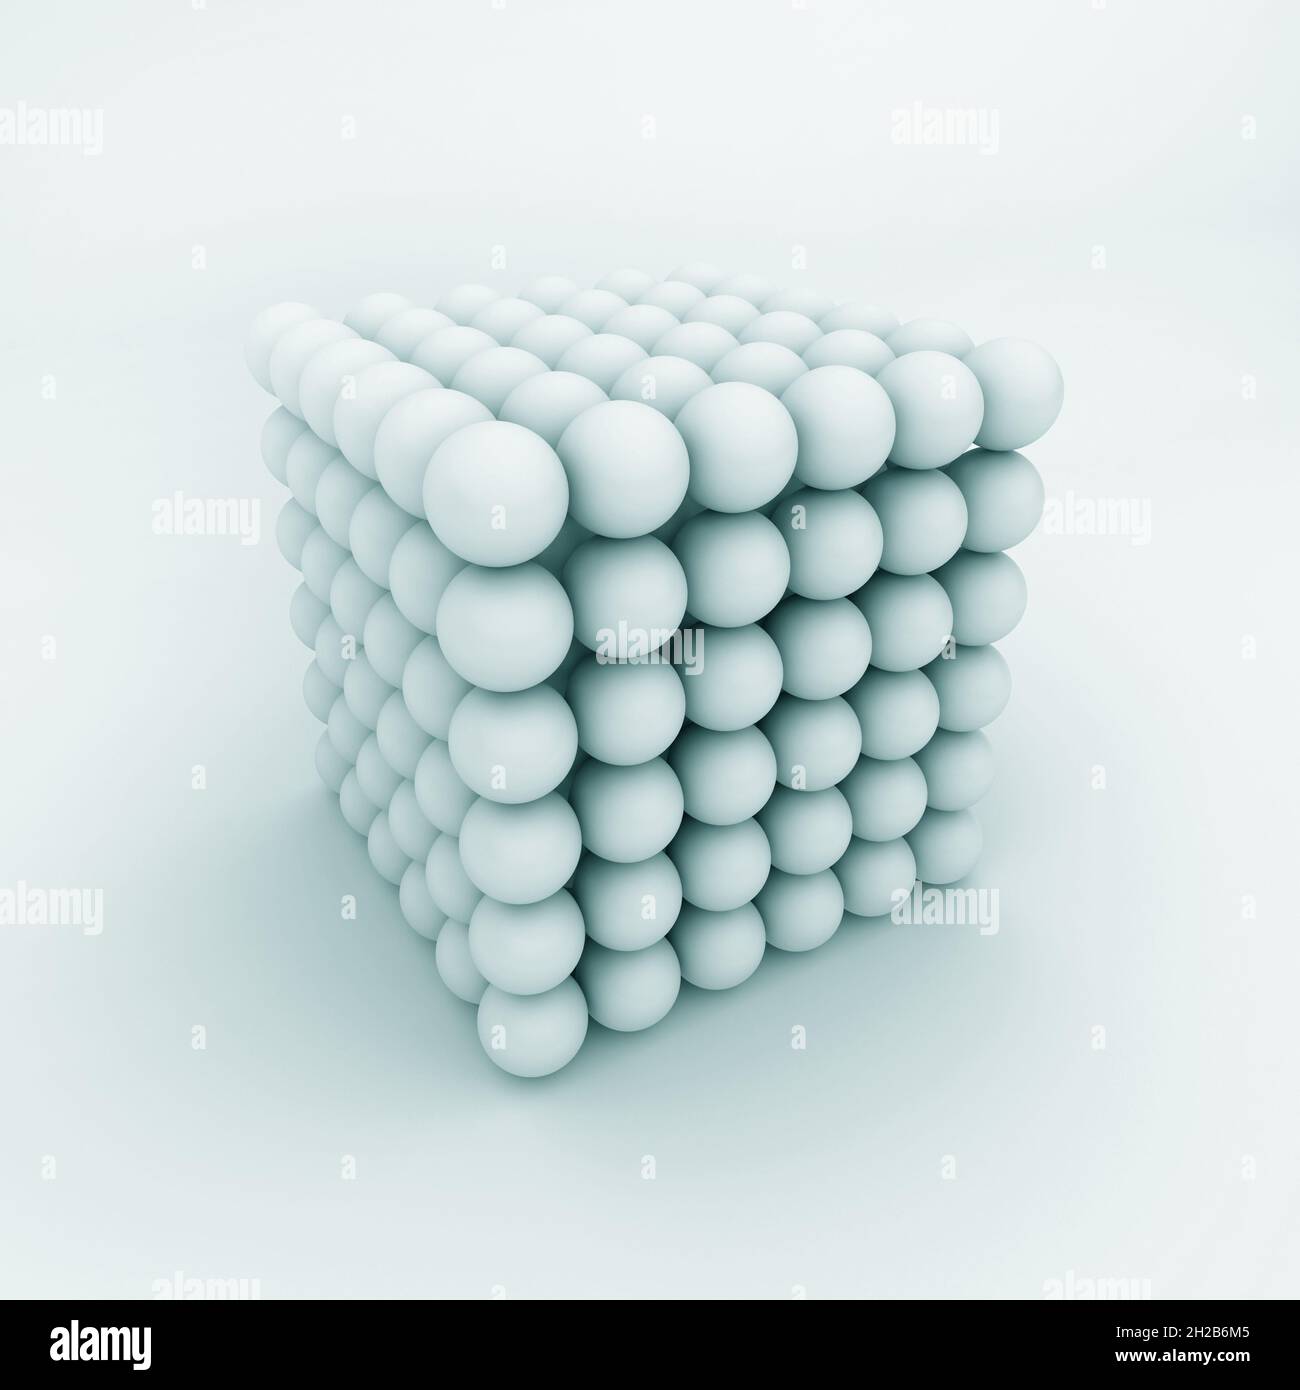 Cube composed of small balls. 3d illustration Stock Photo